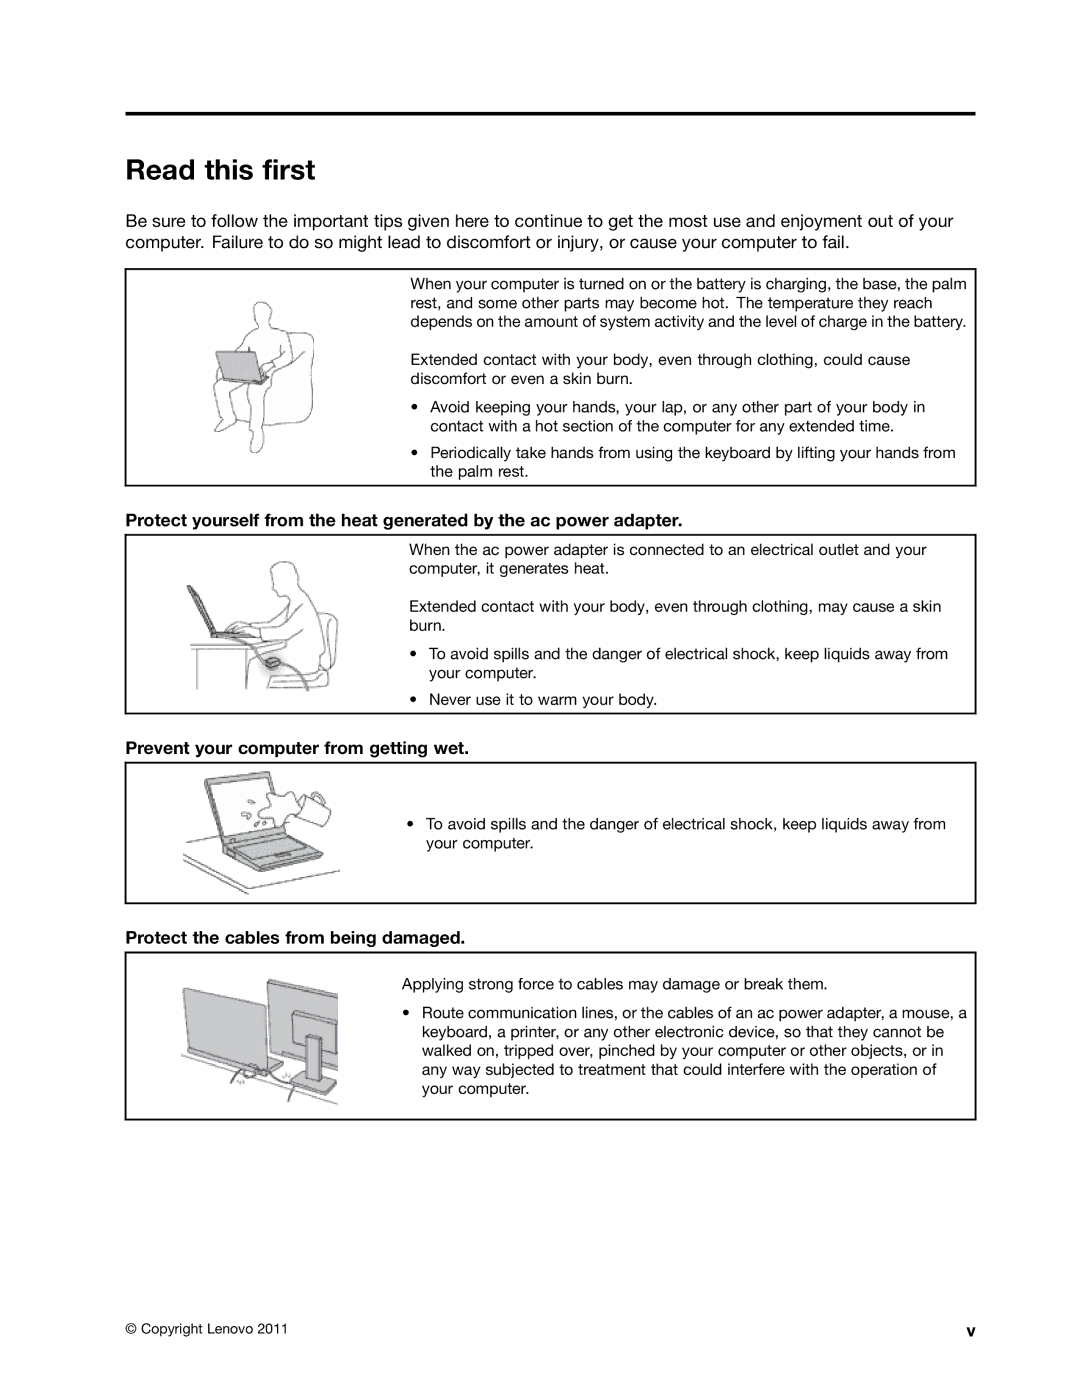 Lenovo 429040 manual Read this first, Prevent your computer from getting wet, Protect the cables from being damaged 